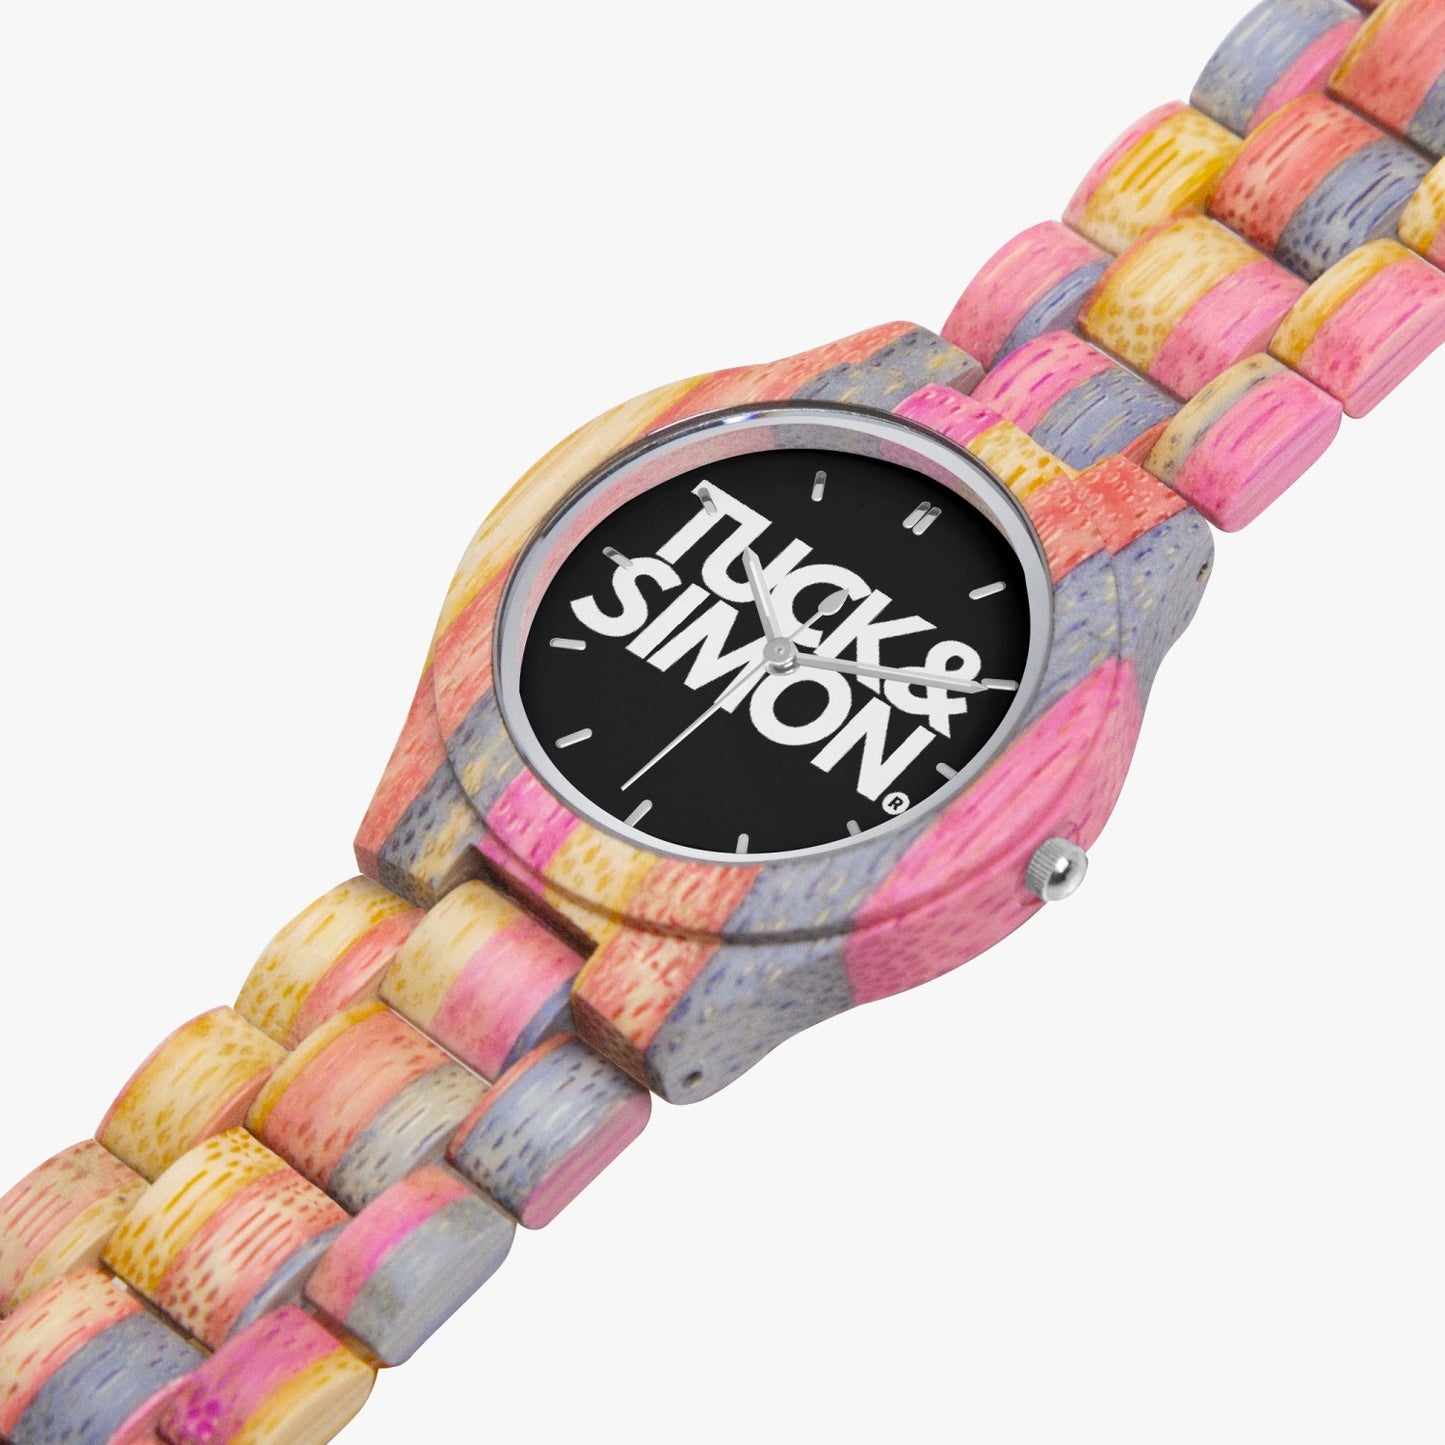 Tuck&Simon Grey/Pink Camouflage Wooden Watch